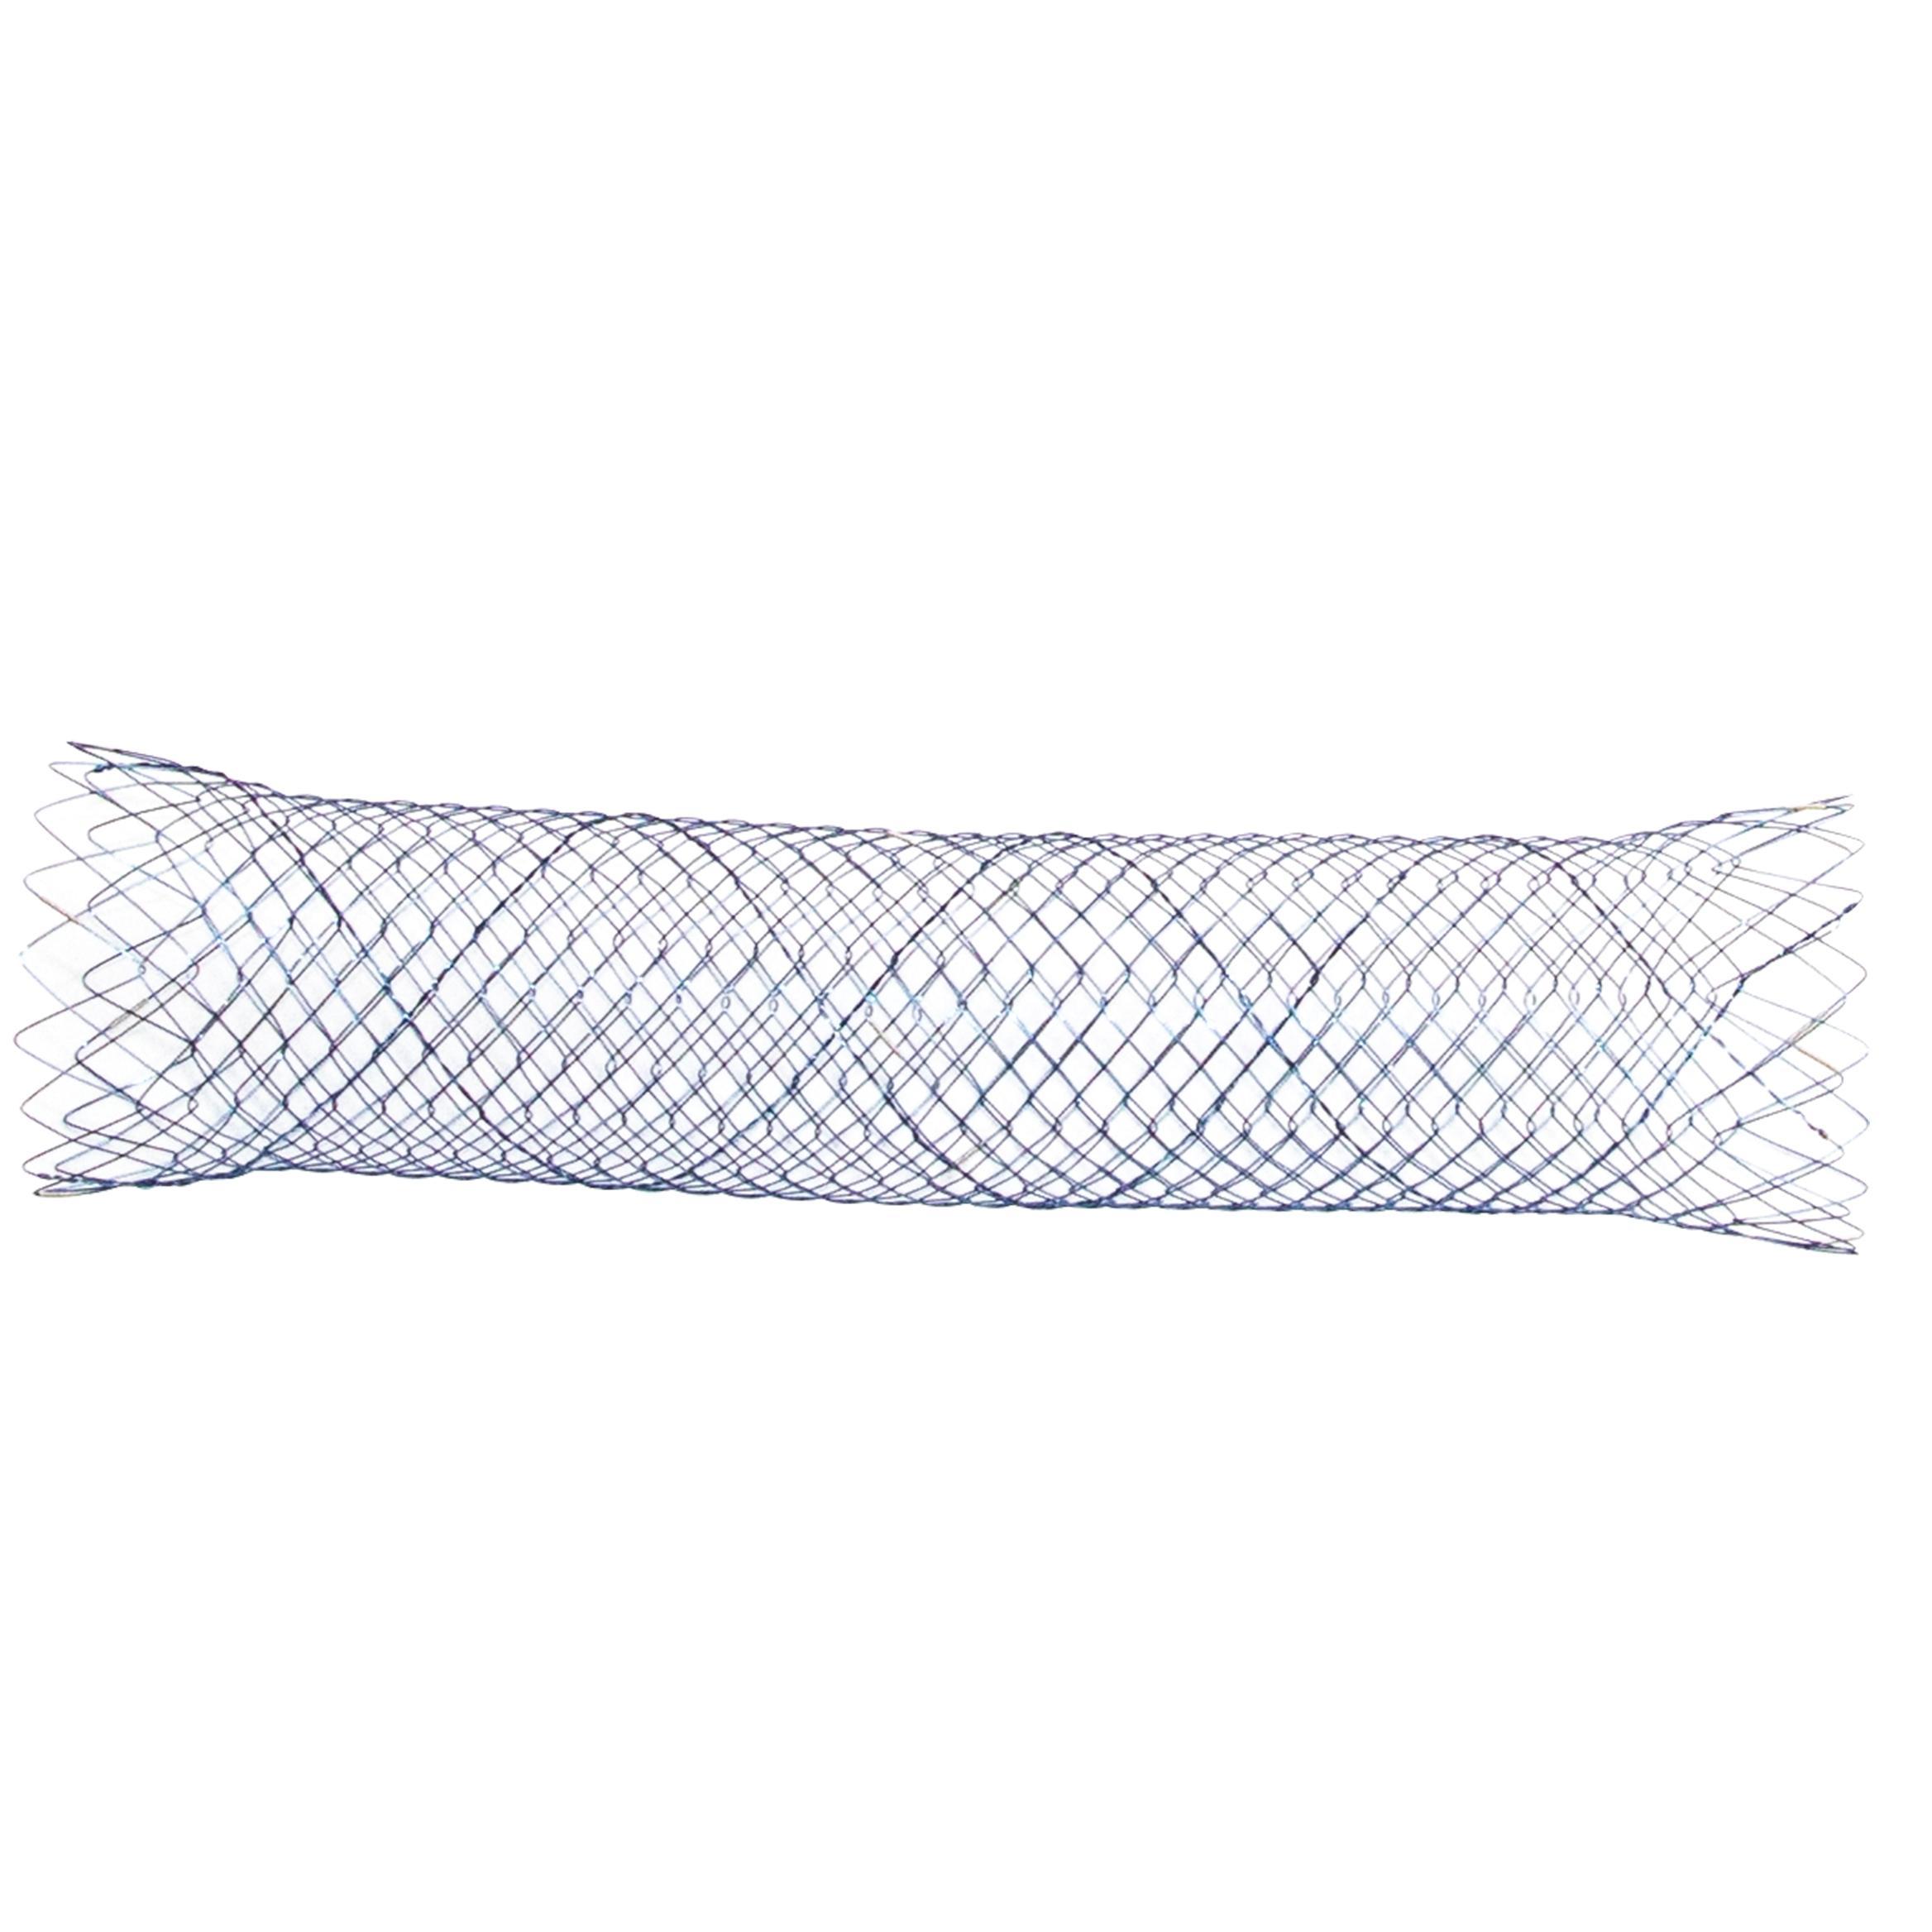 BONASTENT® duodenal and pyloric stent